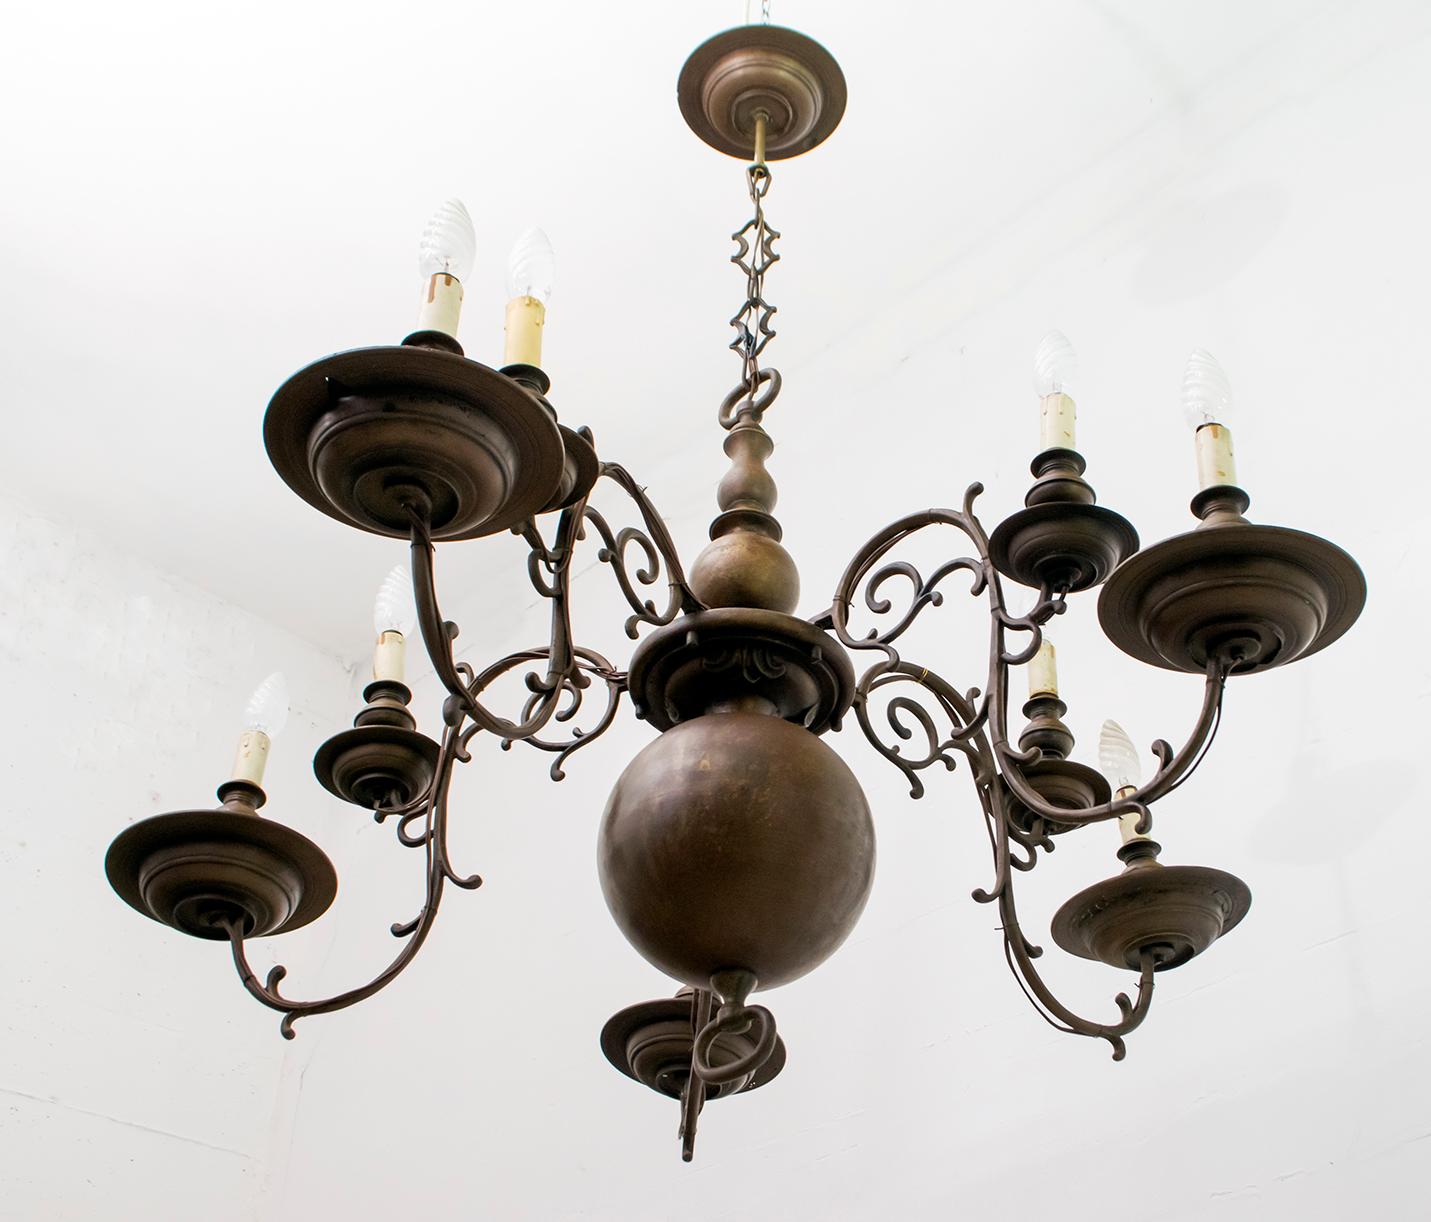 This bronze chandelier of 1700, in ancient times, up and down (see tie rod under the sphere), worked with candles, was subsequently modified and made electric with E14 bulbs and original wooden lamp holders of the early 1900.
The chandelier has